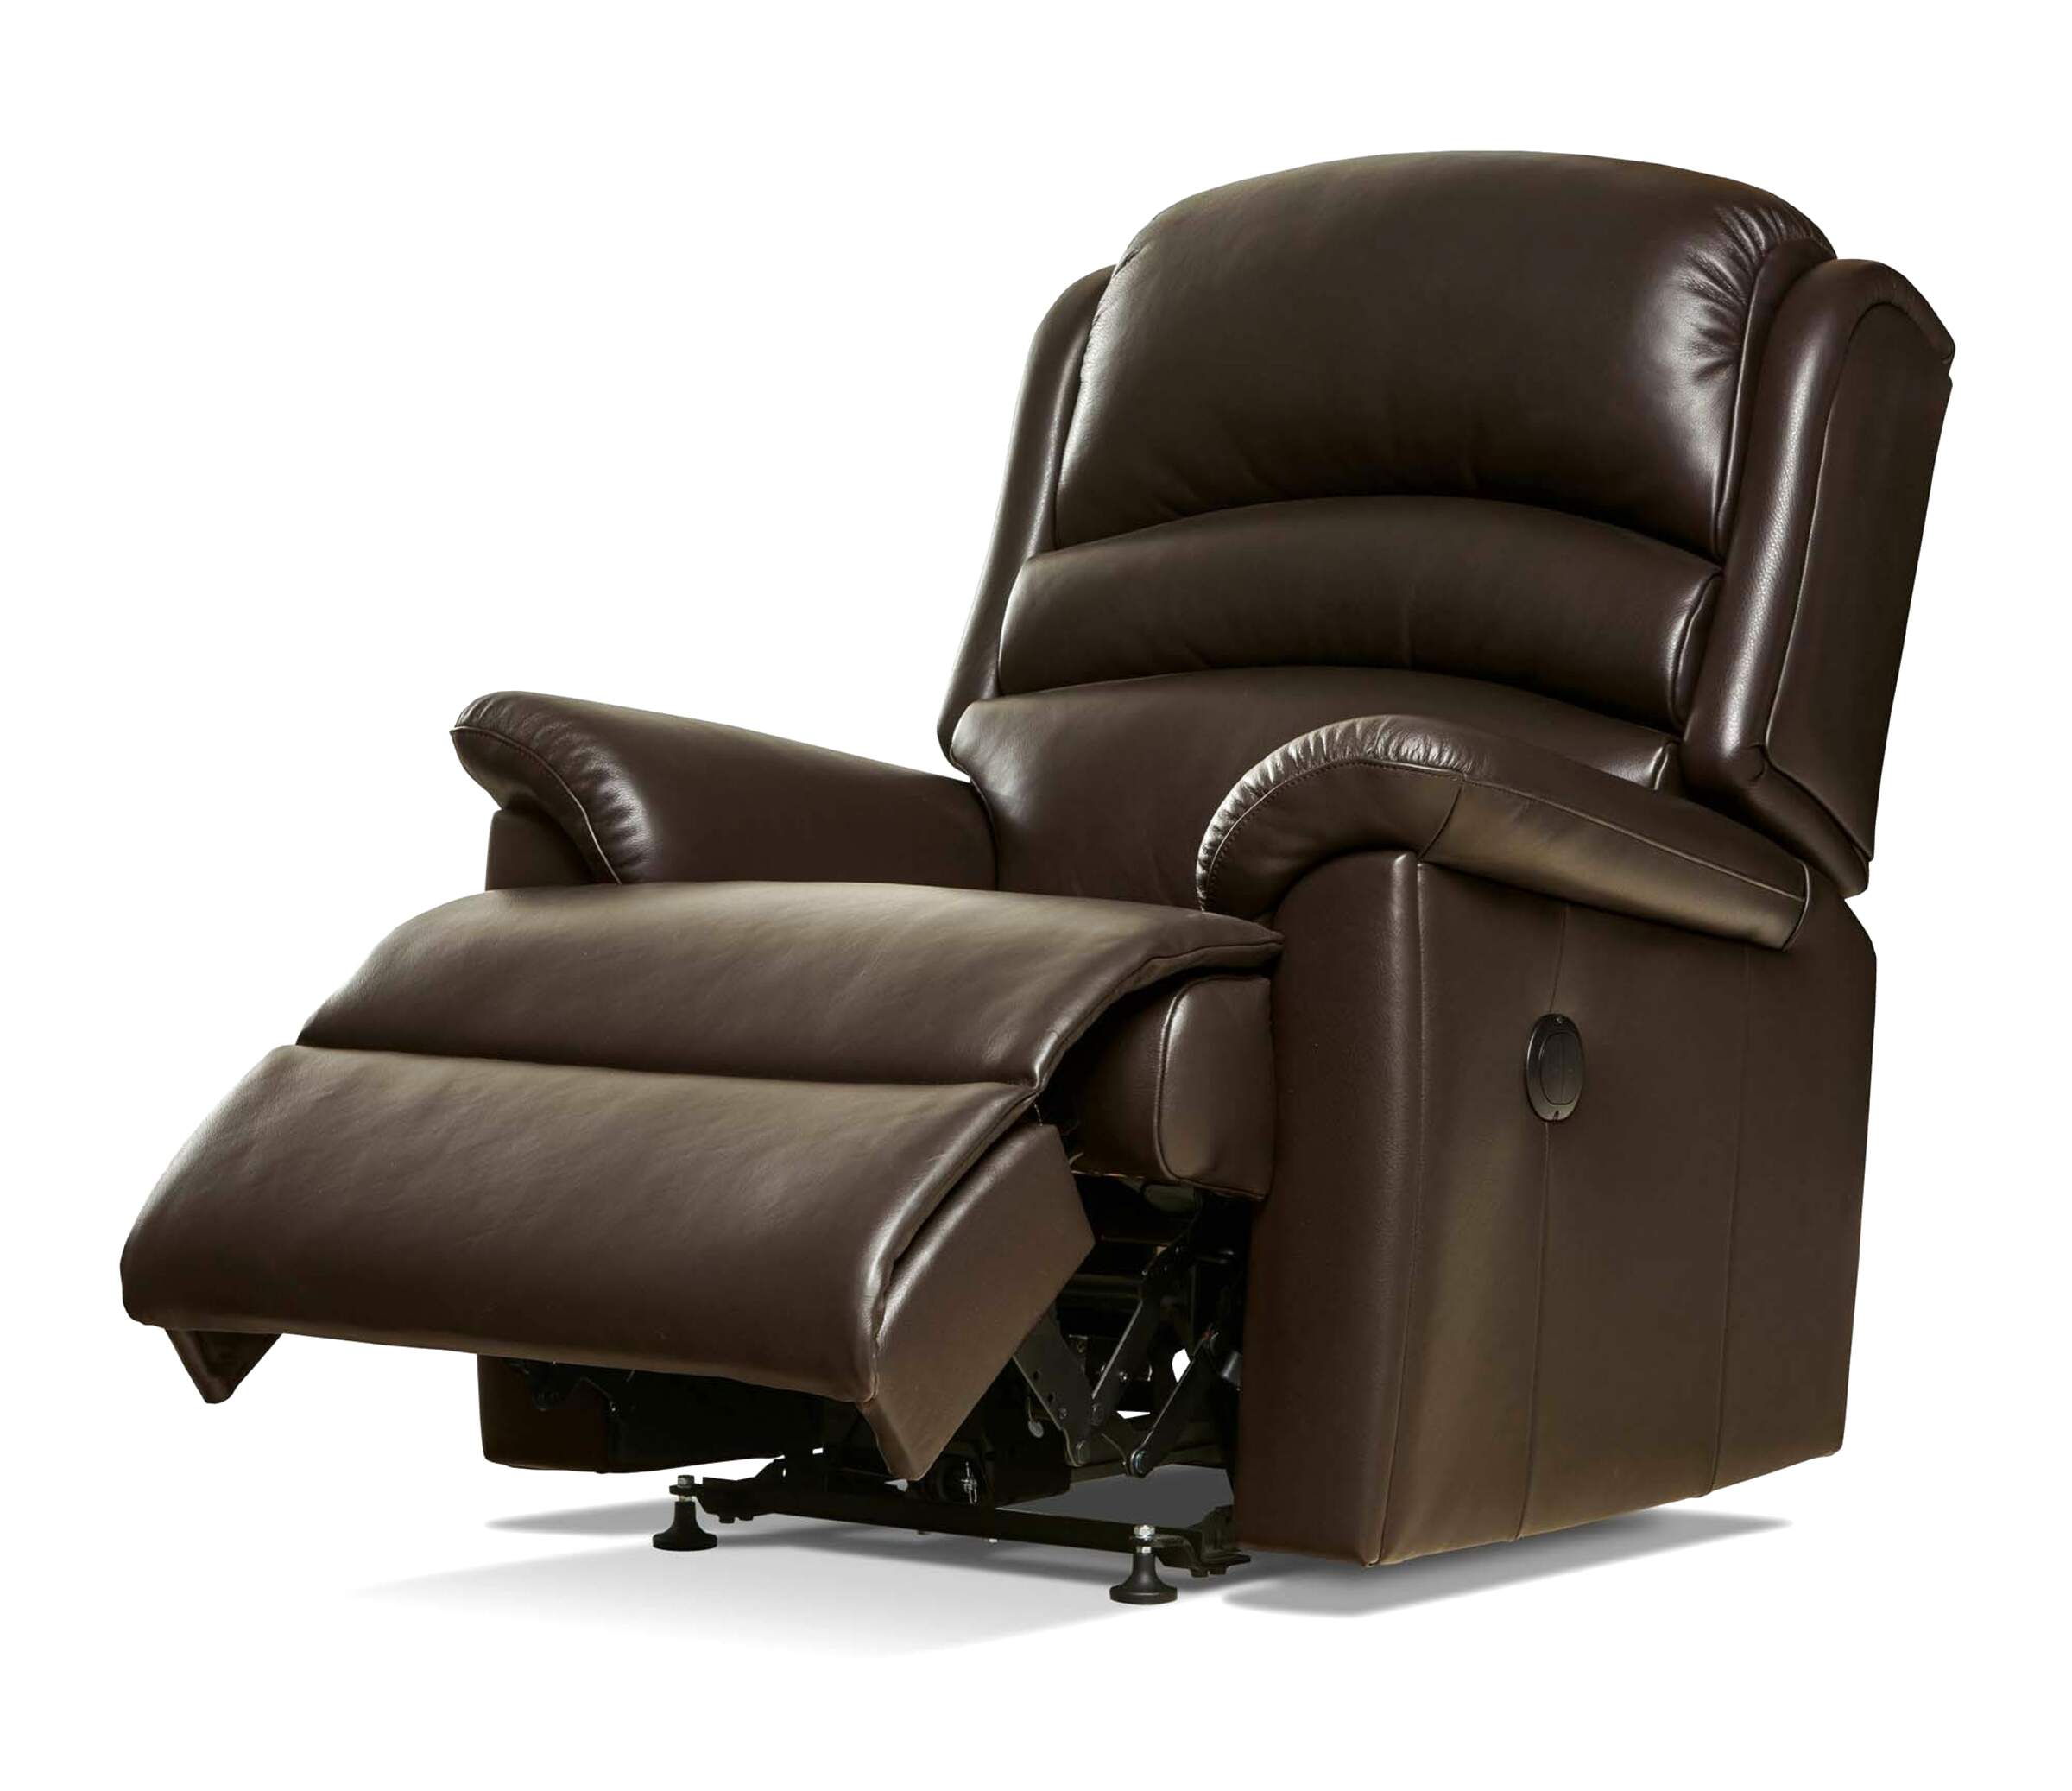 How Much Is A Used Recliner Worth